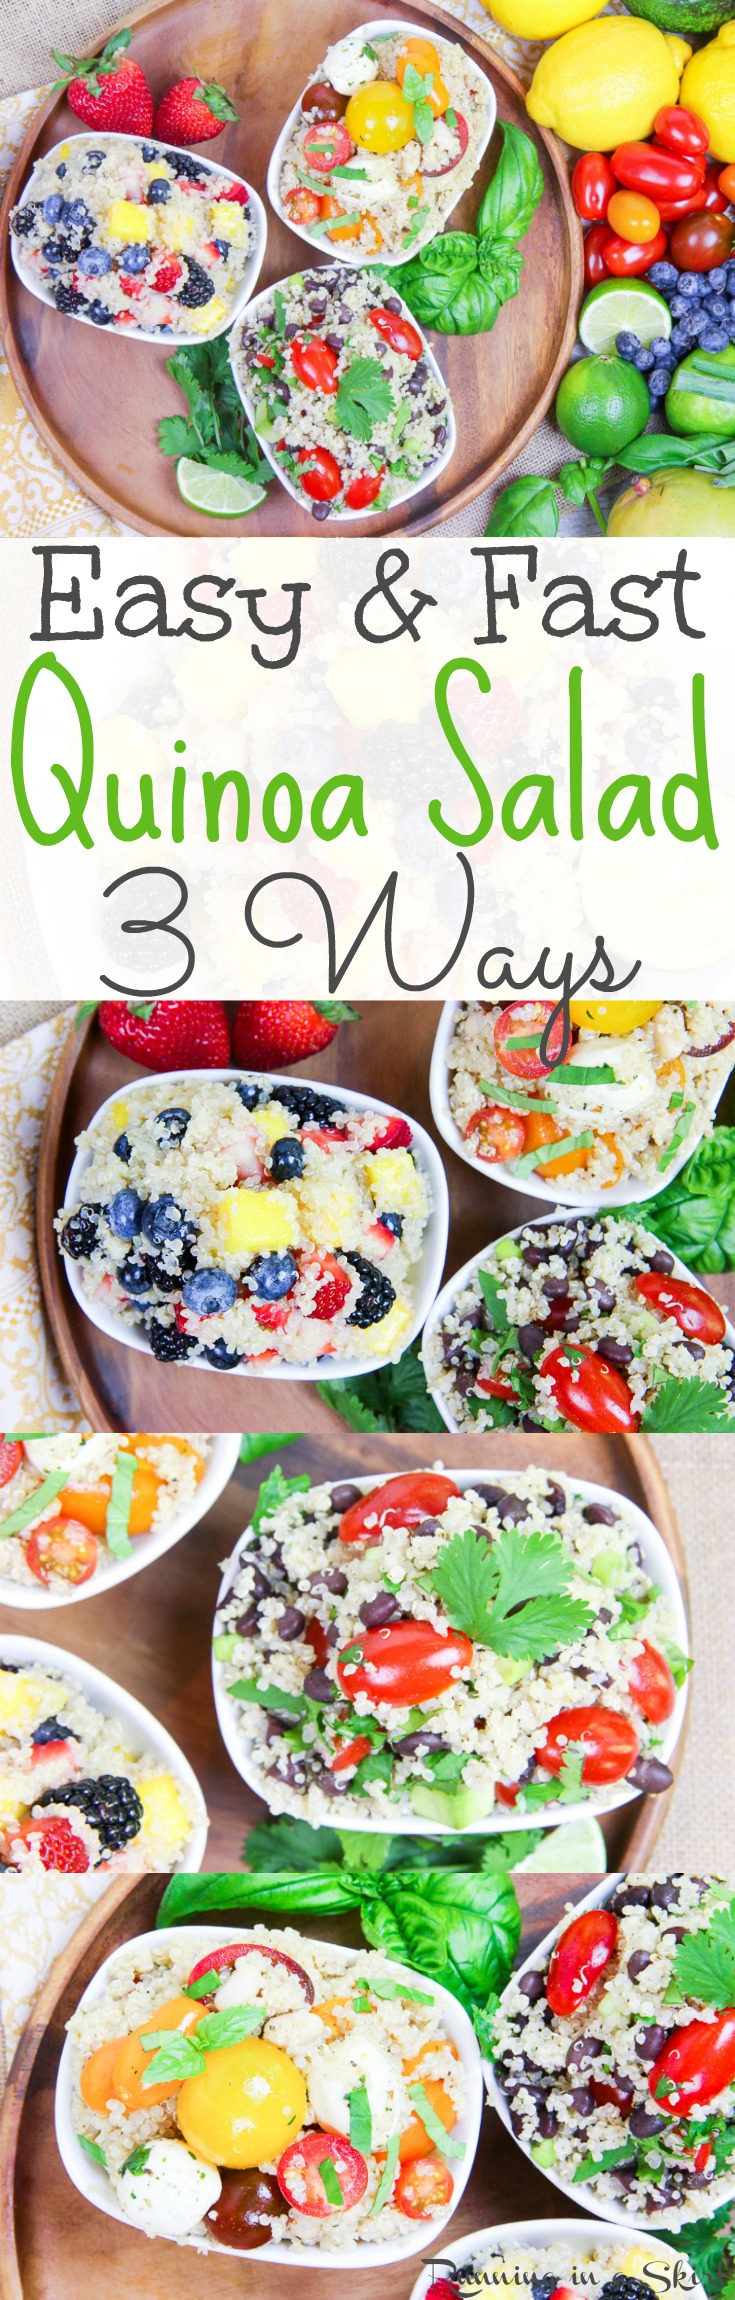 Easy & Fast Quinoa Salad Three Ways!  Healthy Mexican Black Bean Quinoa Salad, Heirloom Tomato Quinoa Salad and Honey Lime Mango Berry Quinoa Salad recipes.  All simple with 7 ingredients or less.  The best gluten free, clean eating, vegetarian lunch idea. All ingredients found at @aldiusa / Running in a Skirt  #IlikeALDI #ALDIGram  via @juliewunder